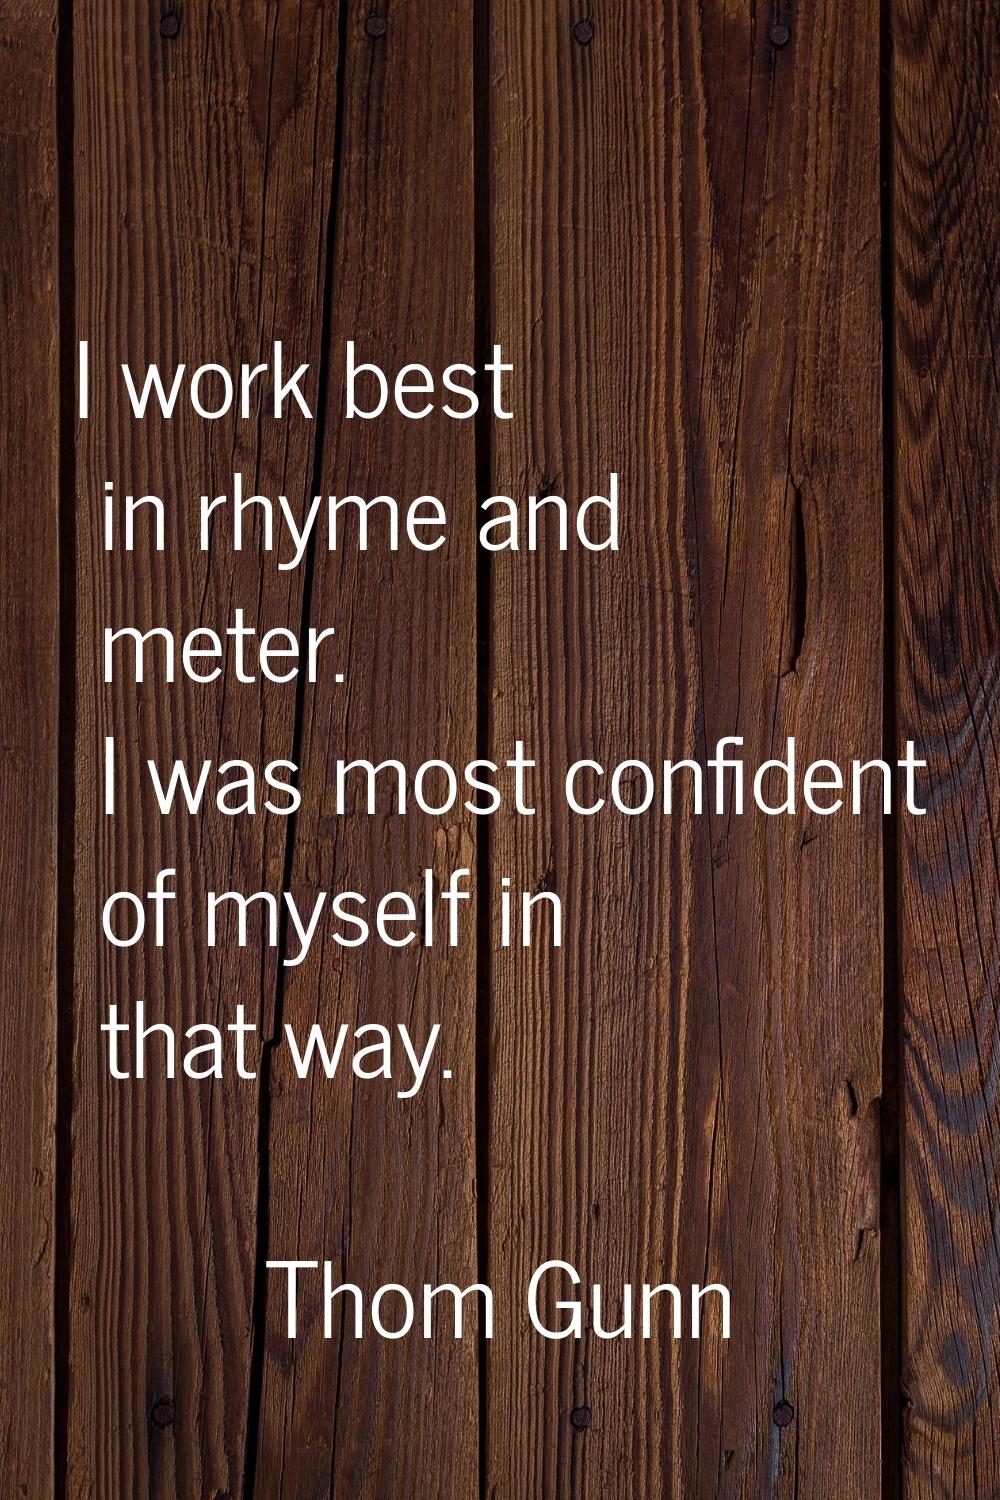 I work best in rhyme and meter. I was most confident of myself in that way.